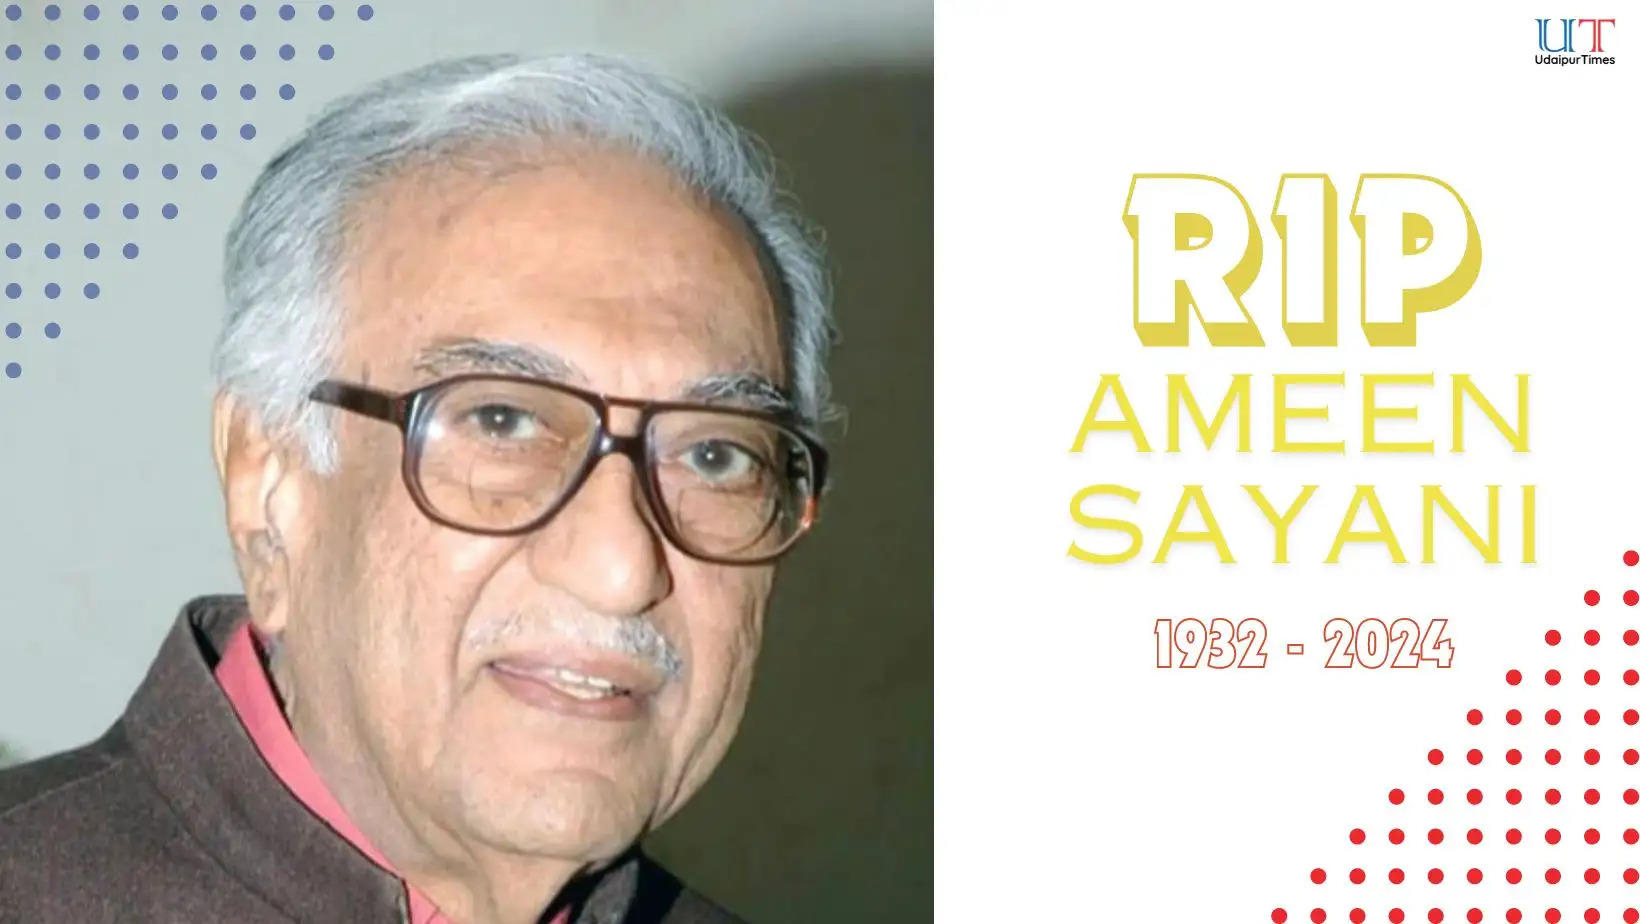 Ameen Sayani iconic voice of Binaca Geetmala passes away at 91 due to a heart attack